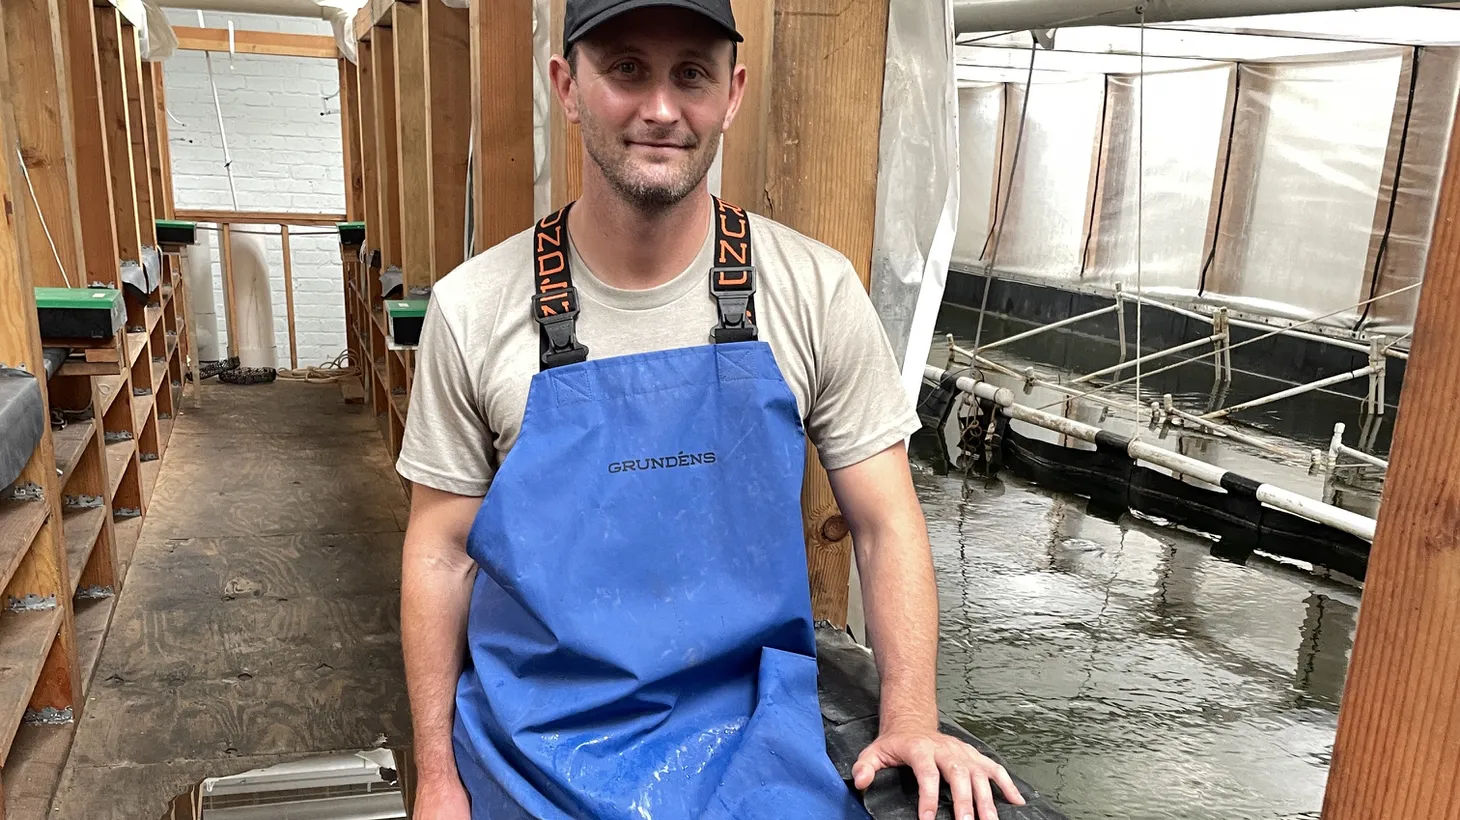 TransparentSea farms founder Steve Sutton poses next to a large tank of Pacific whiteleg prawns at his shrimp farm in Downey.